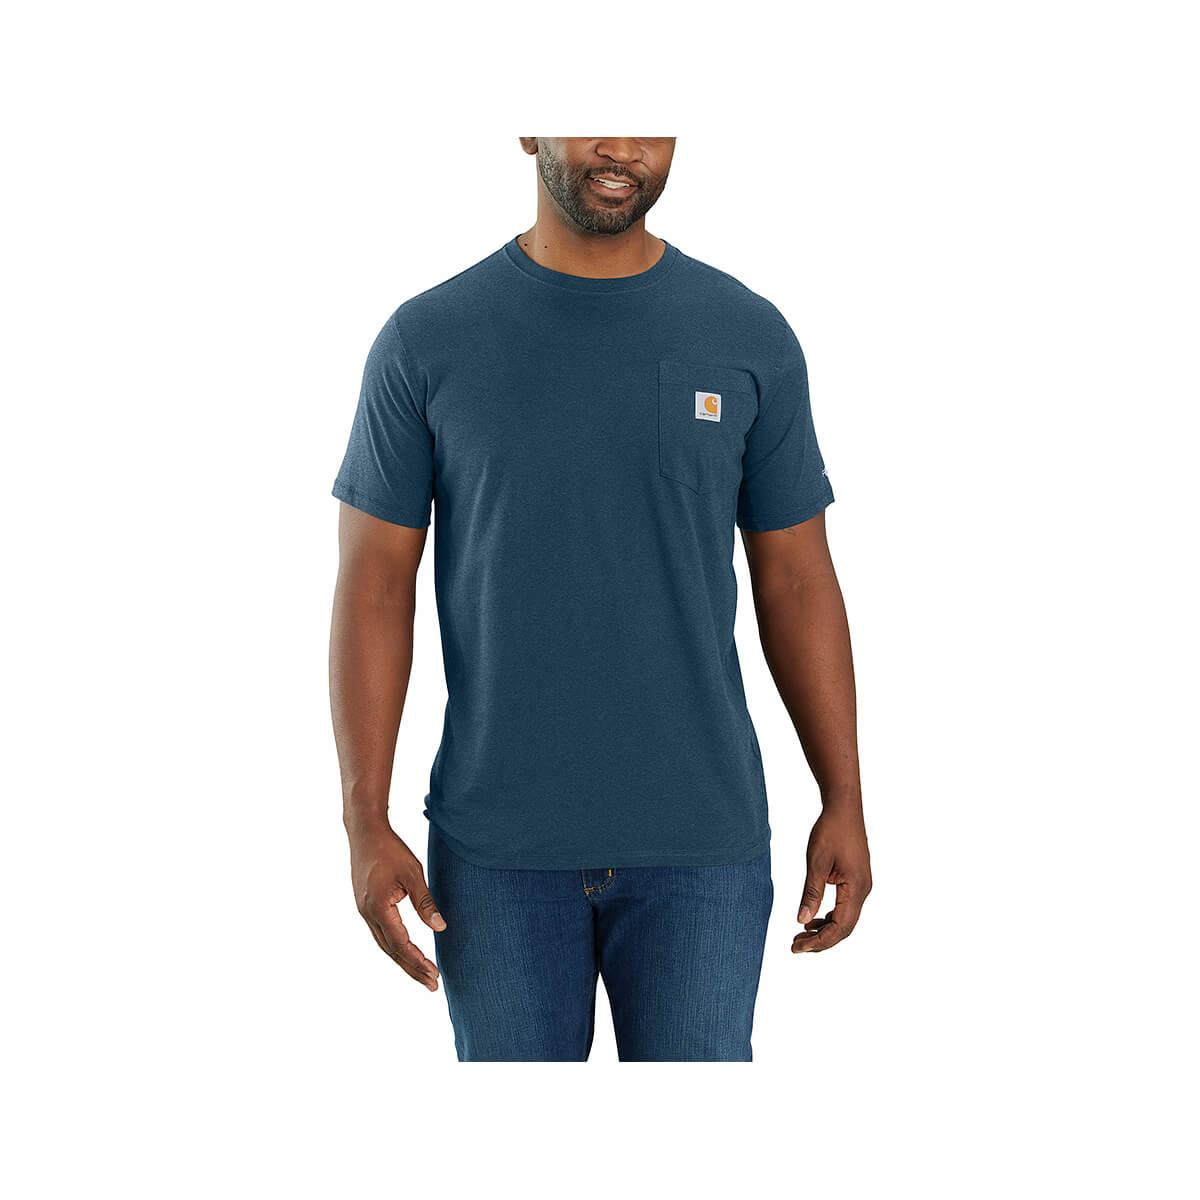  Men's Force Relaxed Fit Short Sleeve Pocket T- Shirt - Tall